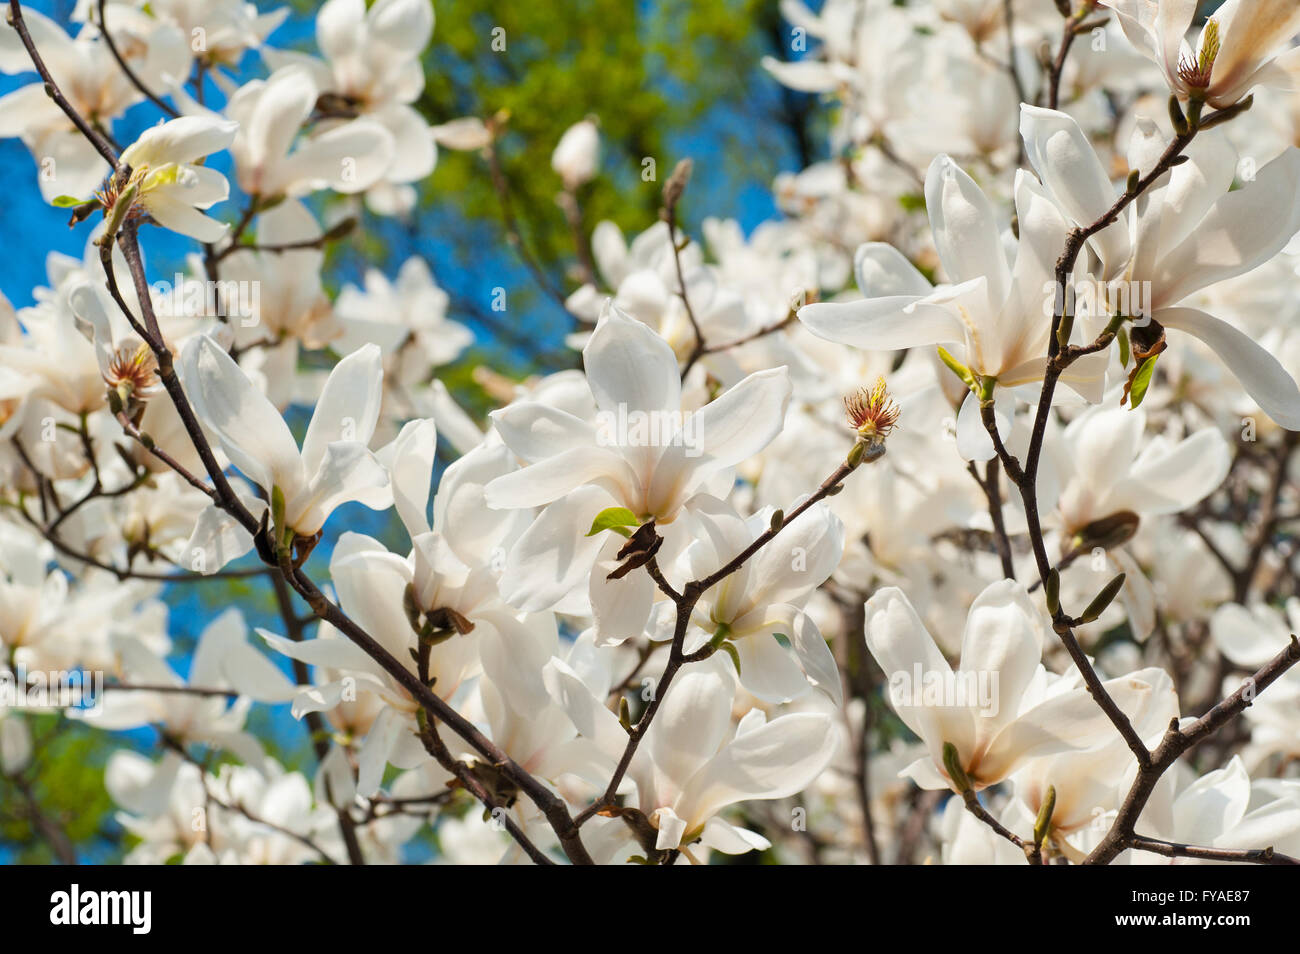 image of blossoming magnolia flowers in spring time Stock Photo